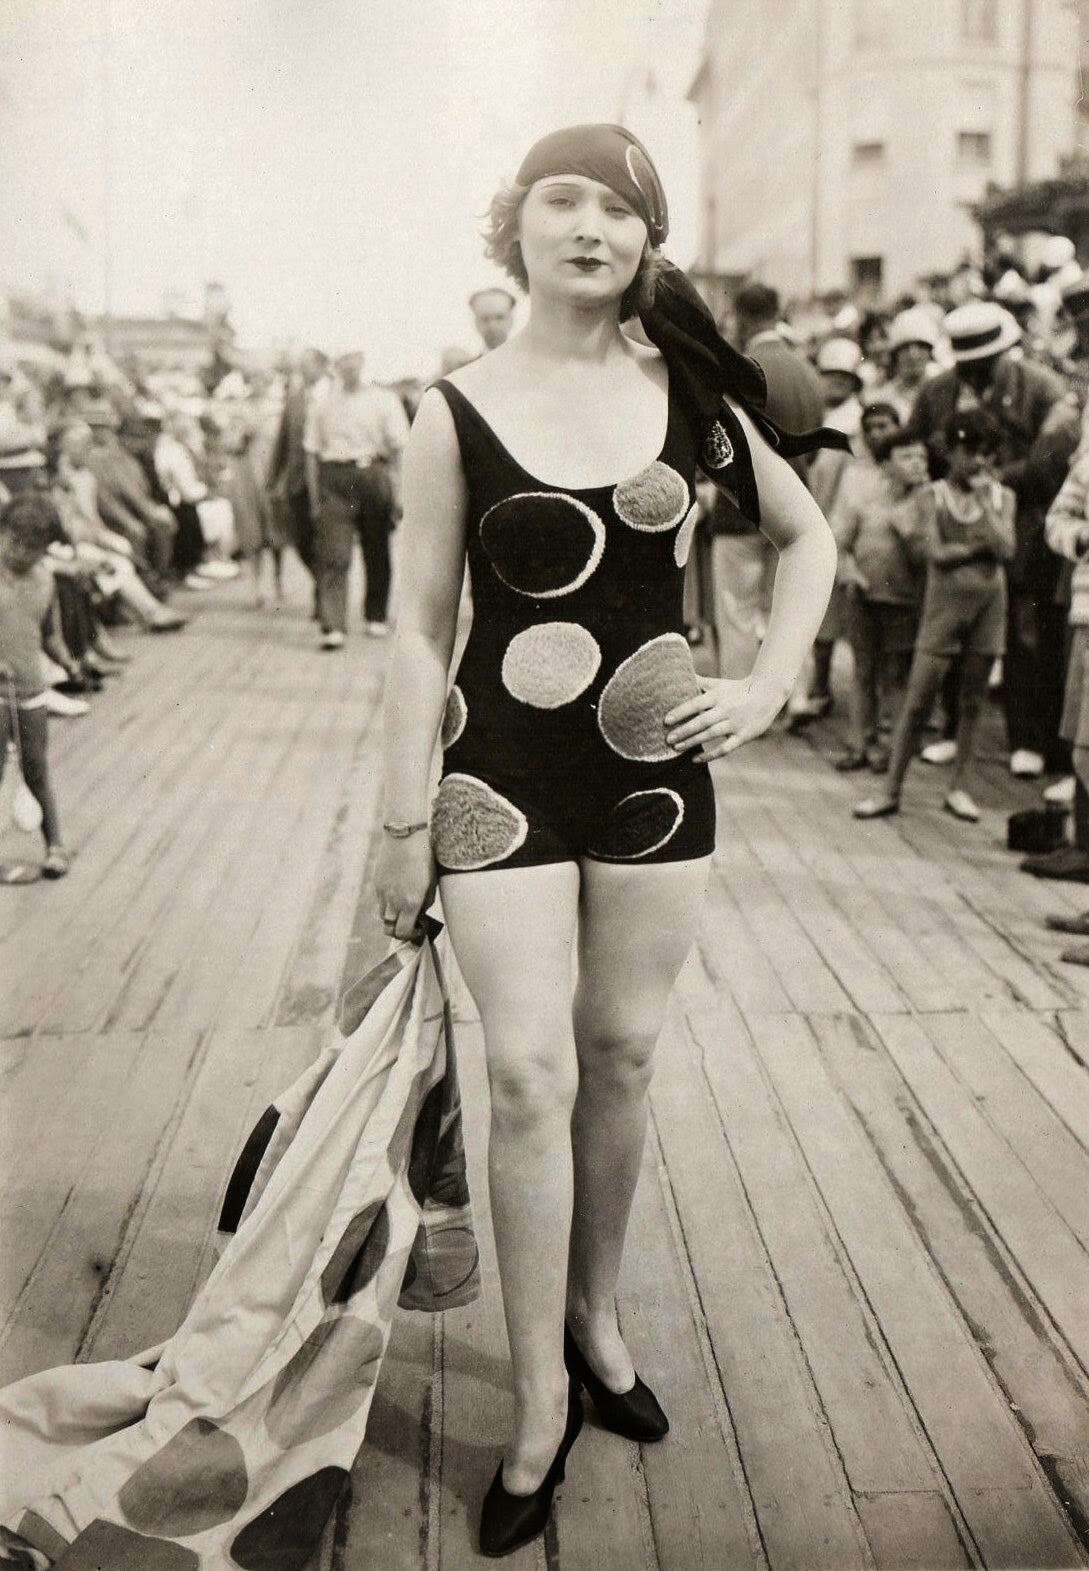 A woman shows off her bathing suit in France in 1930.